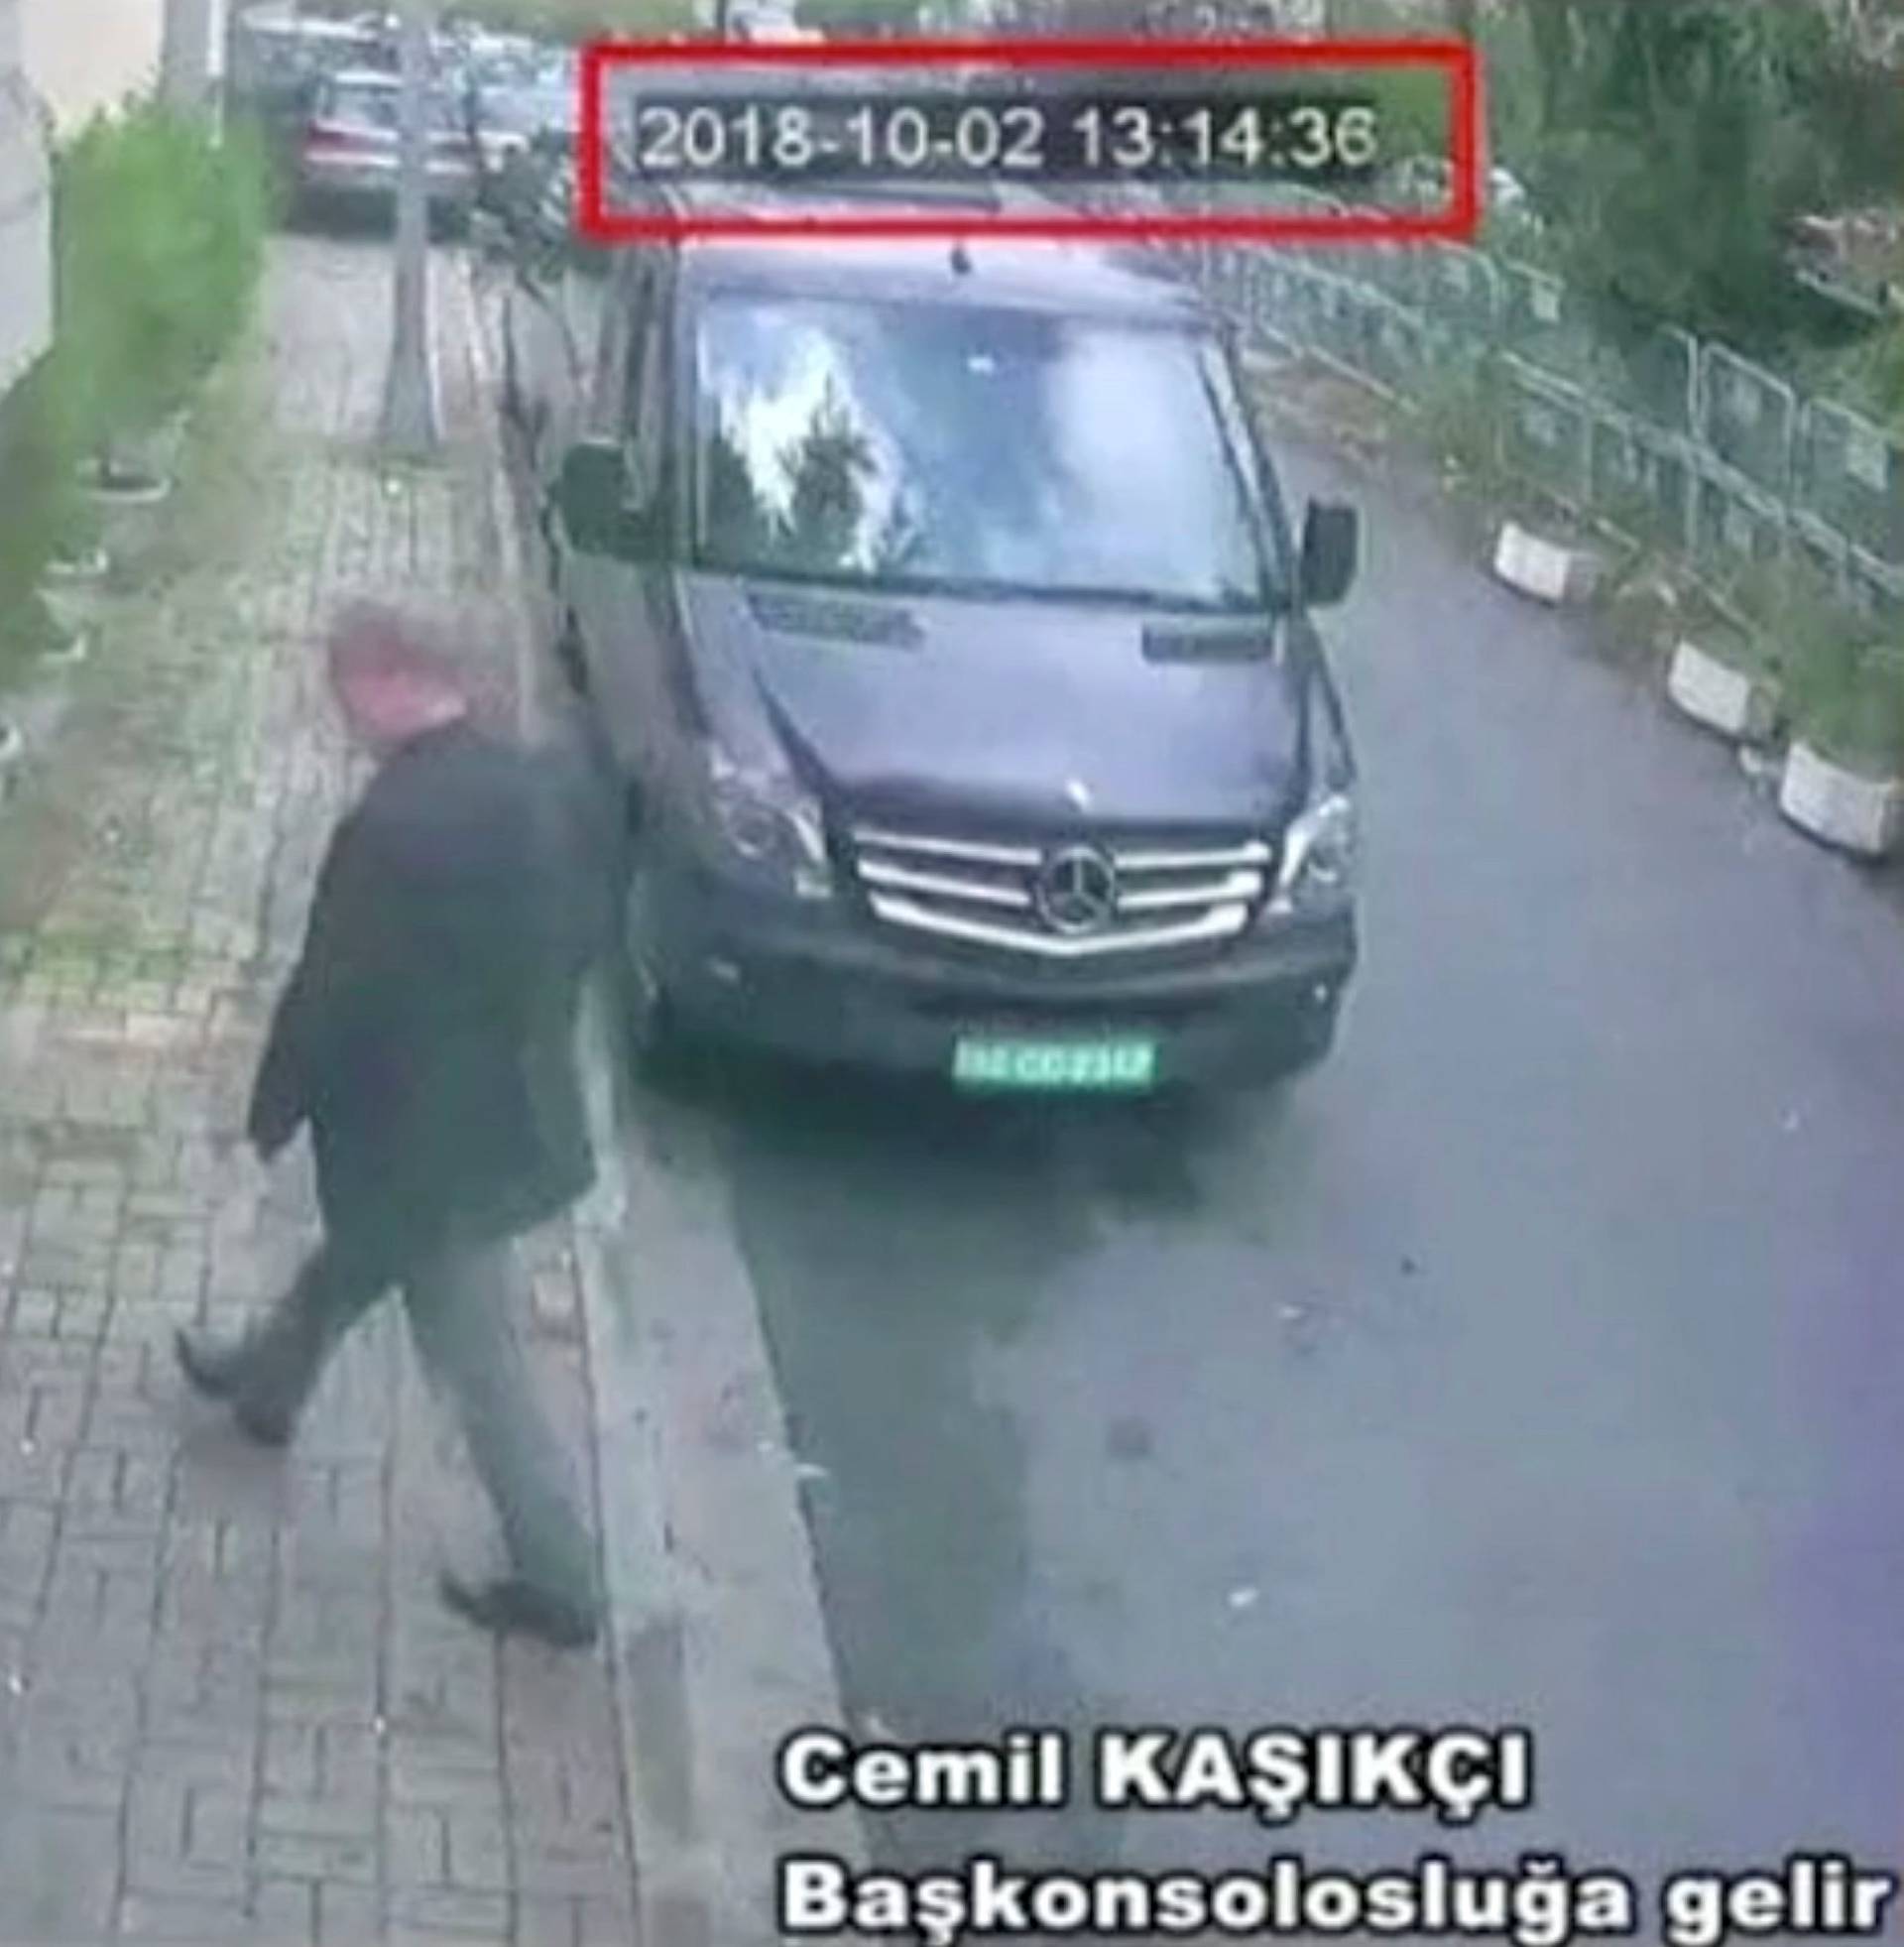 A still image taken from CCTV video and obtained by TRT World claims to show Saudi journalist Khashoggi as he arrives at Saudi Arabia's consulate in Istanbul